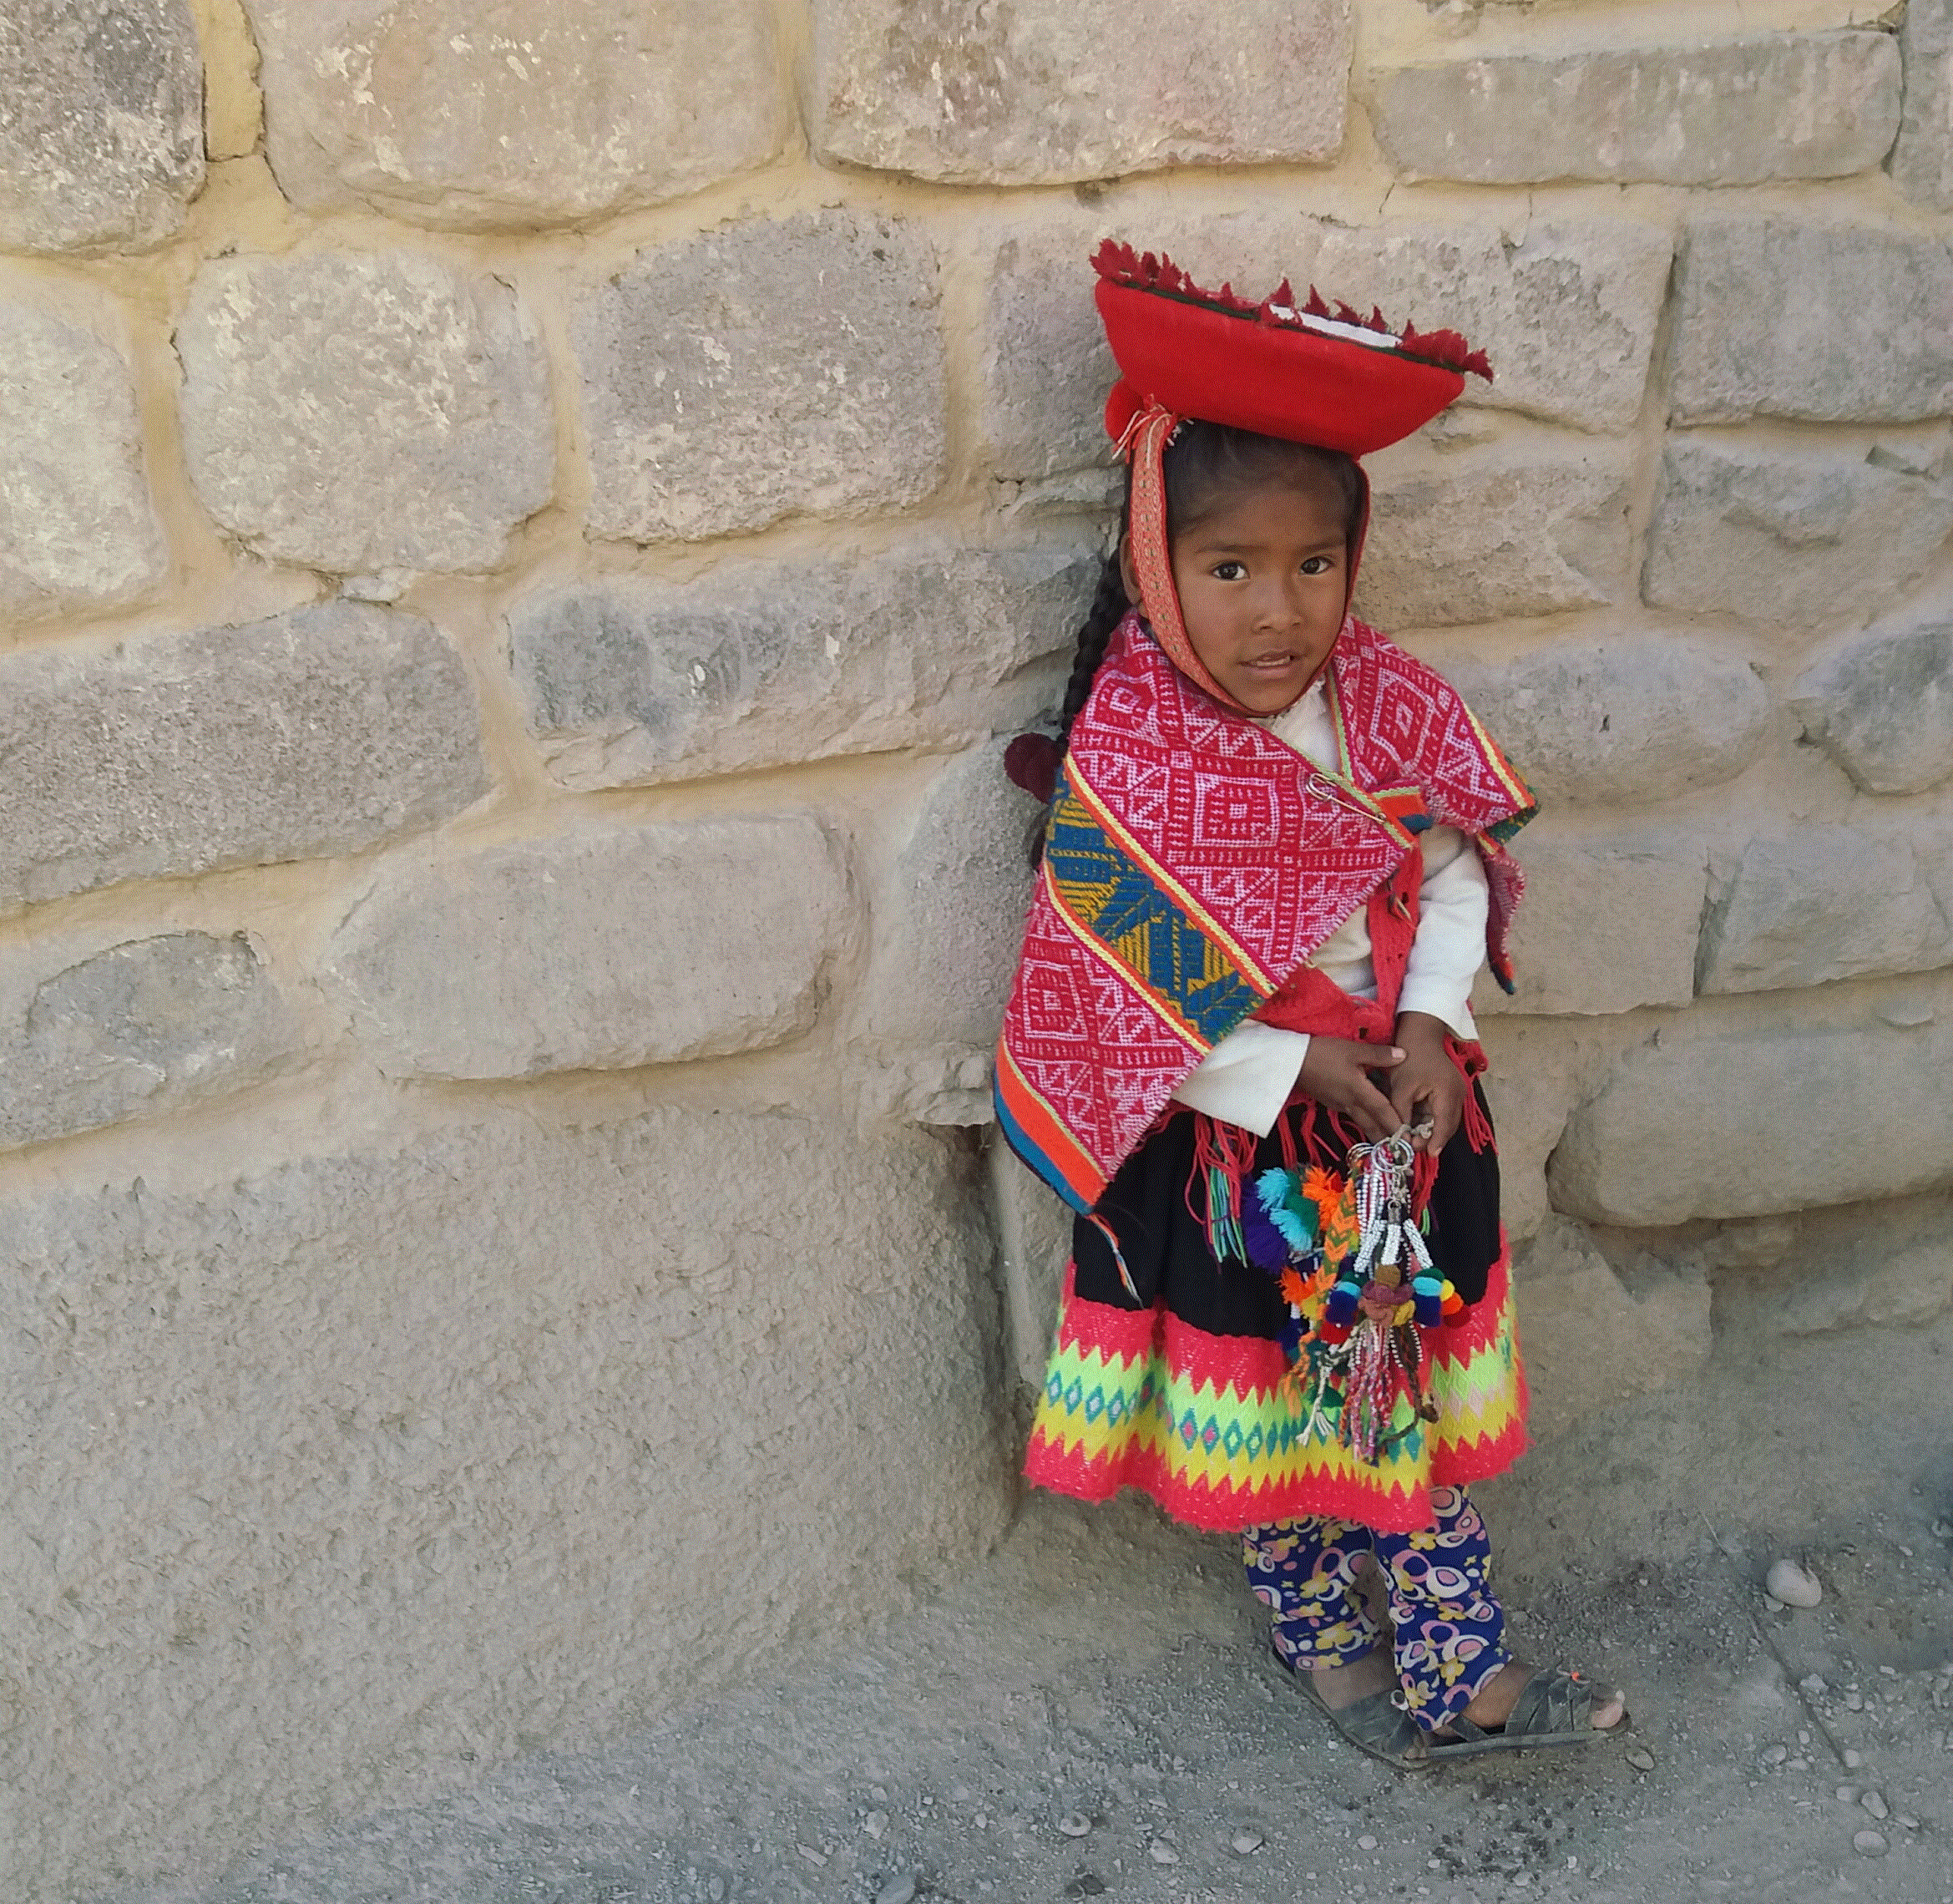 "This girl was trying to sell us key chains and accessories. She was dressed in the normal way indigenous locals dressed." Image and text by Dorothy Francis. Peru, 2017.